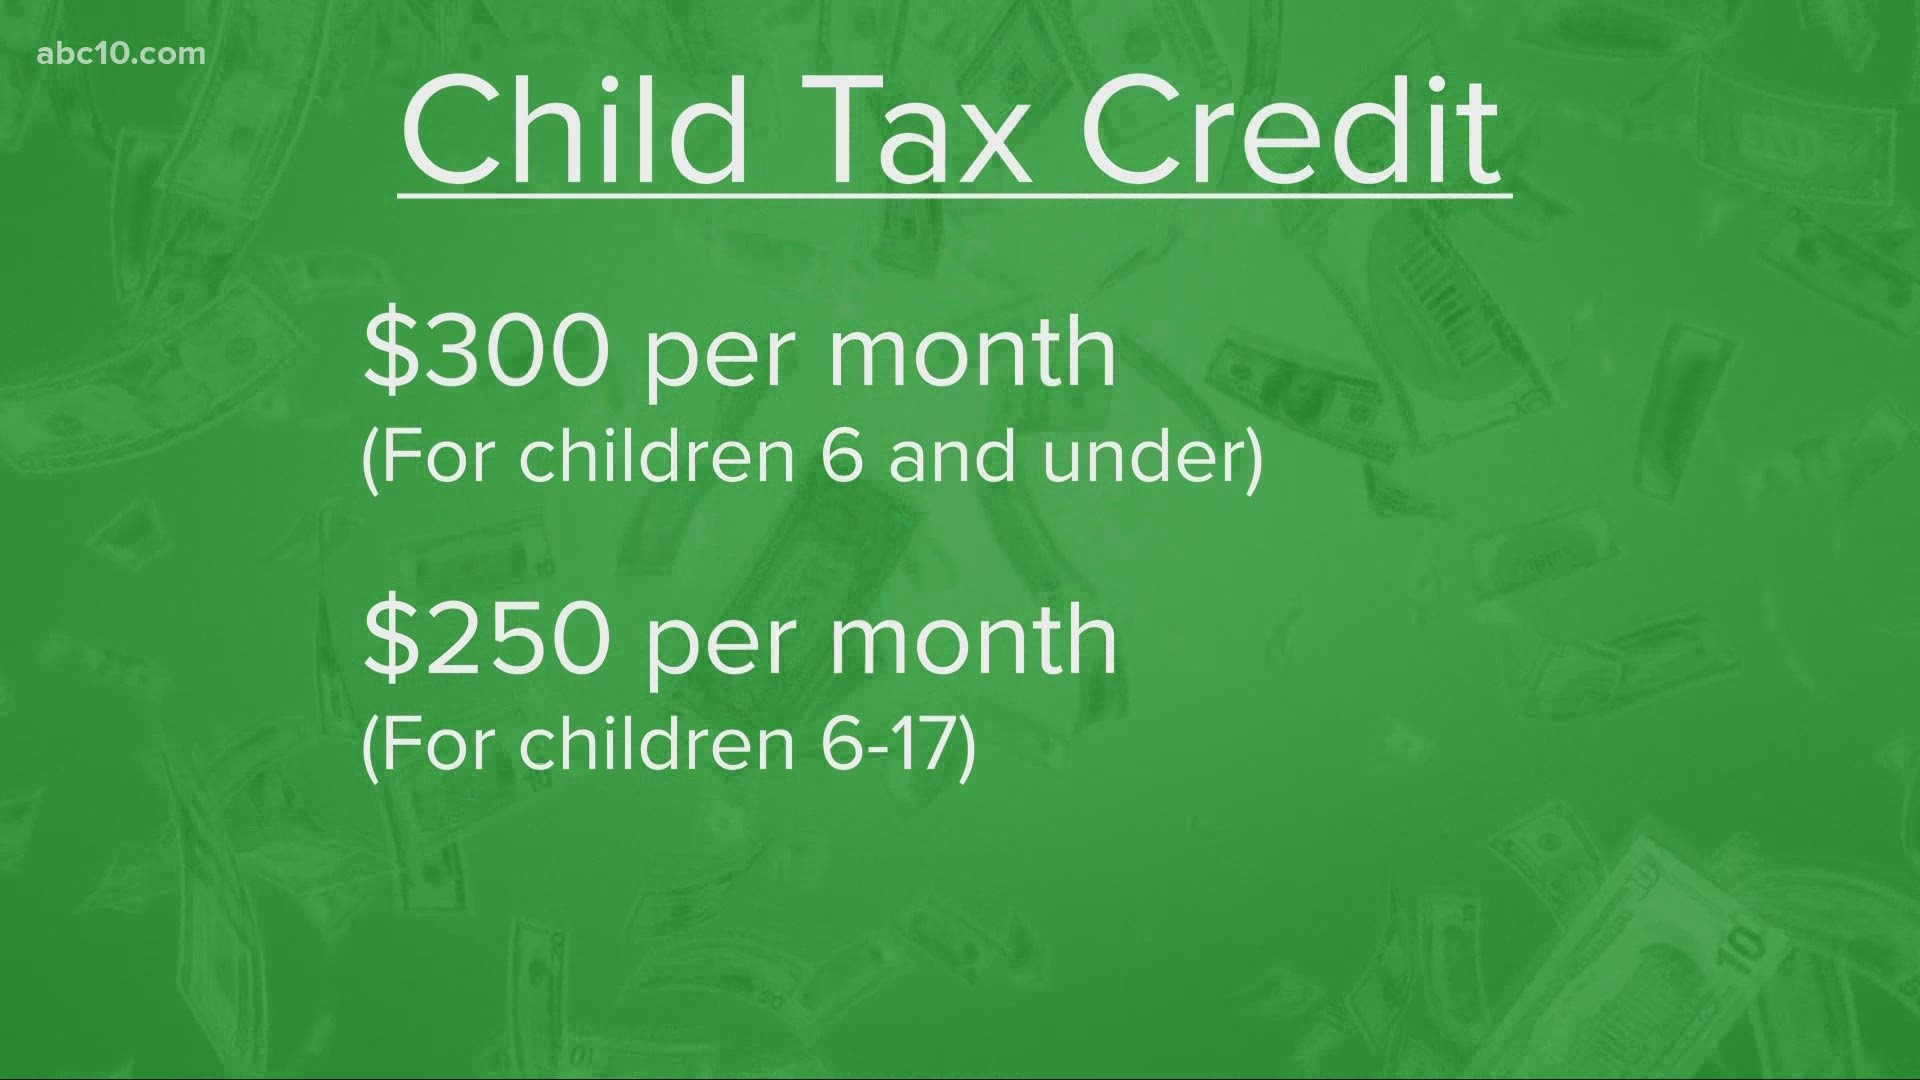 Still have questions about the Child Tax Credit? We break it down for you.